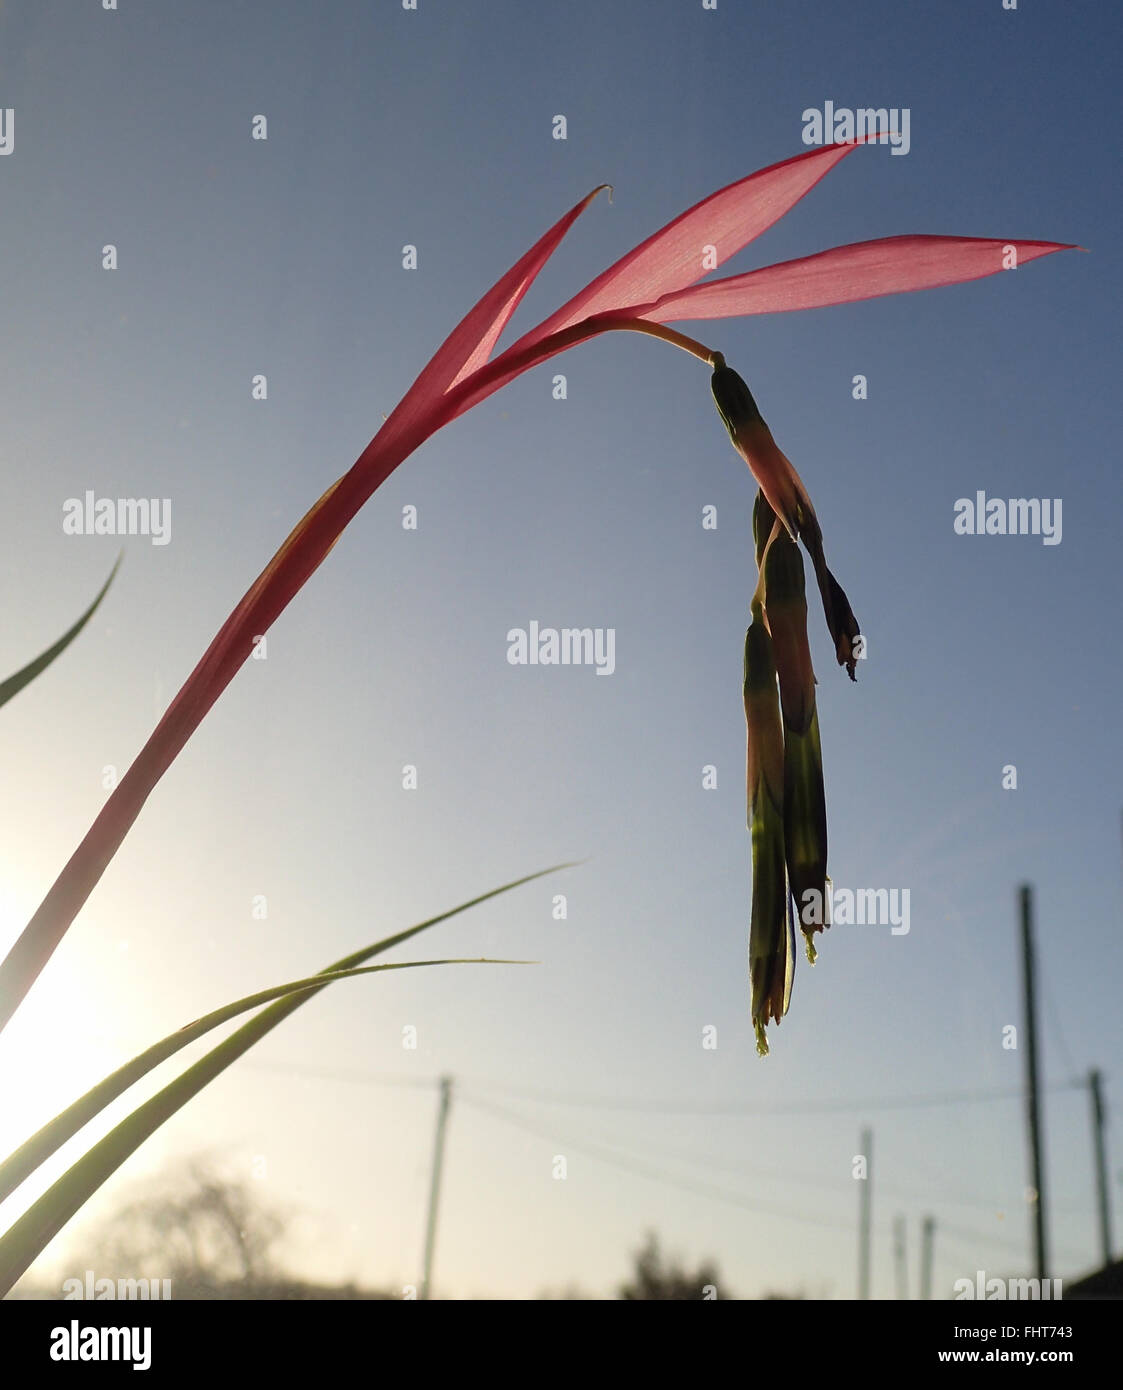 Close up of flower spike of queen's tears (Billbergia nutans) plant against a blue sky with sun beams from rising sun Stock Photo